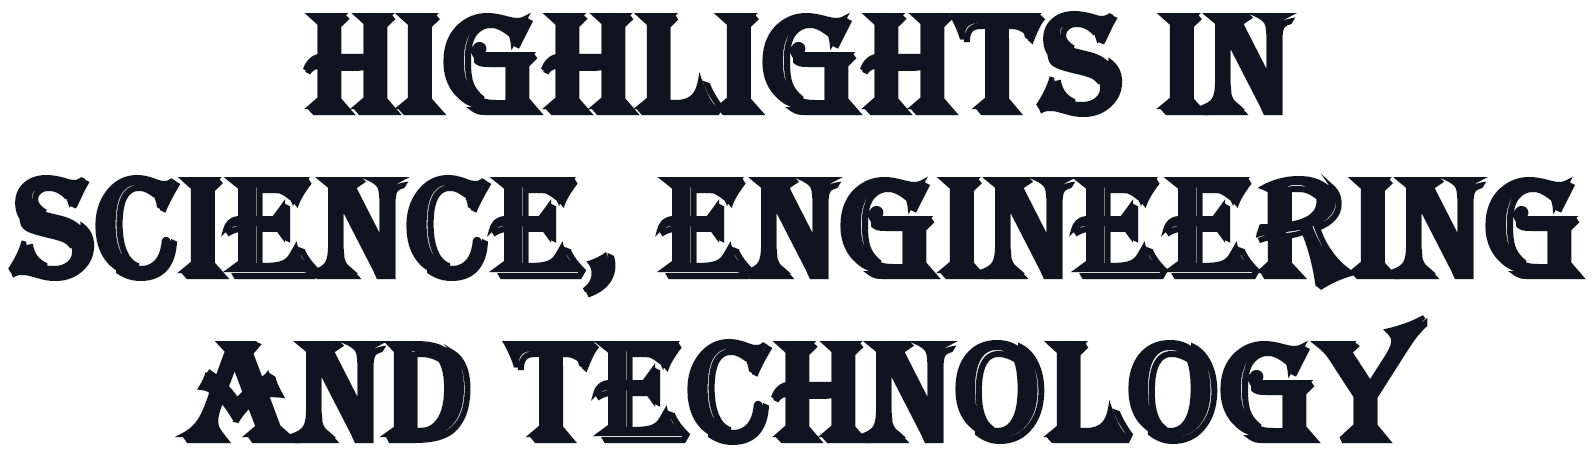 Highlights in Science, Engineering and Technology